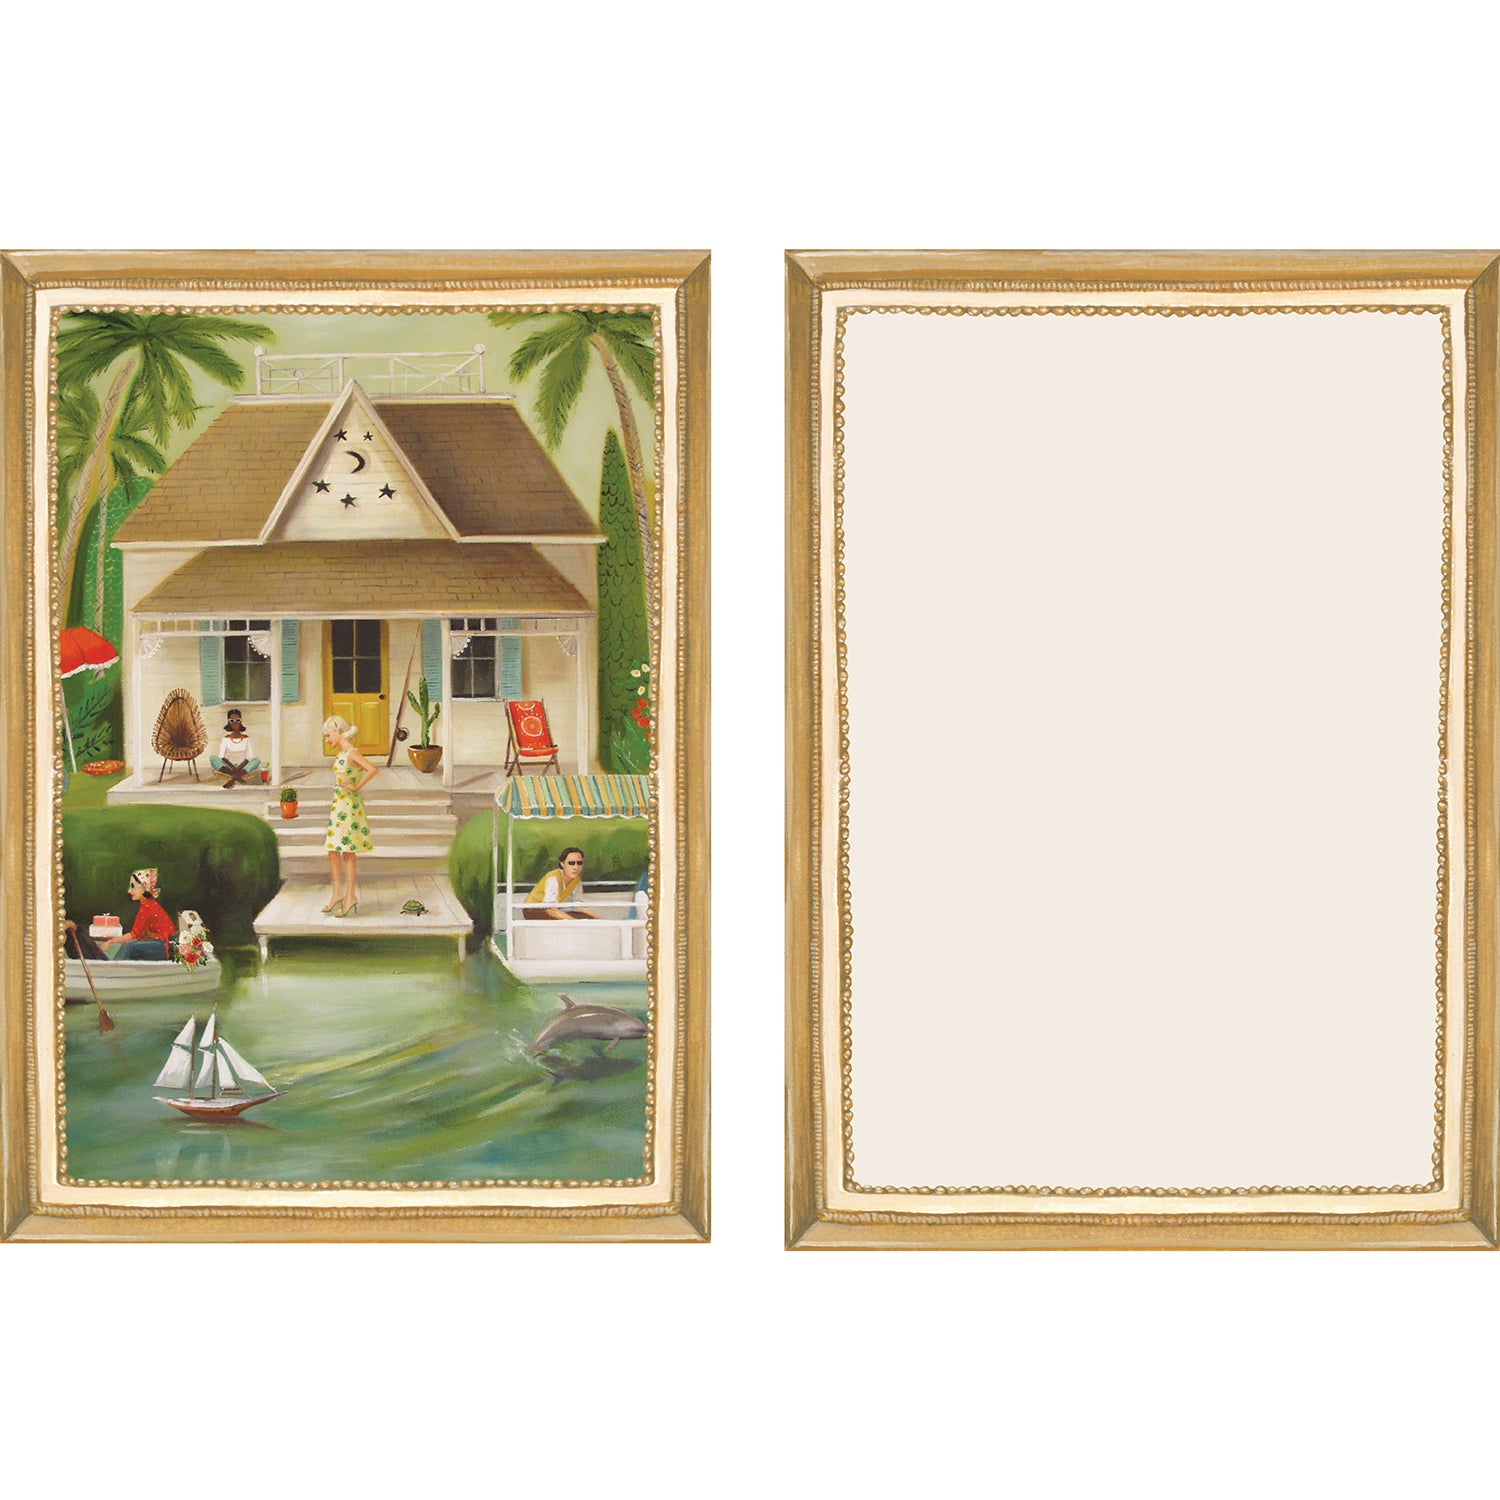 A pair of On Holiday Flat Note Boxed Set of 6 Cards by Hester &amp; Cook, featuring Janet Hill vacation-inspired artwork.